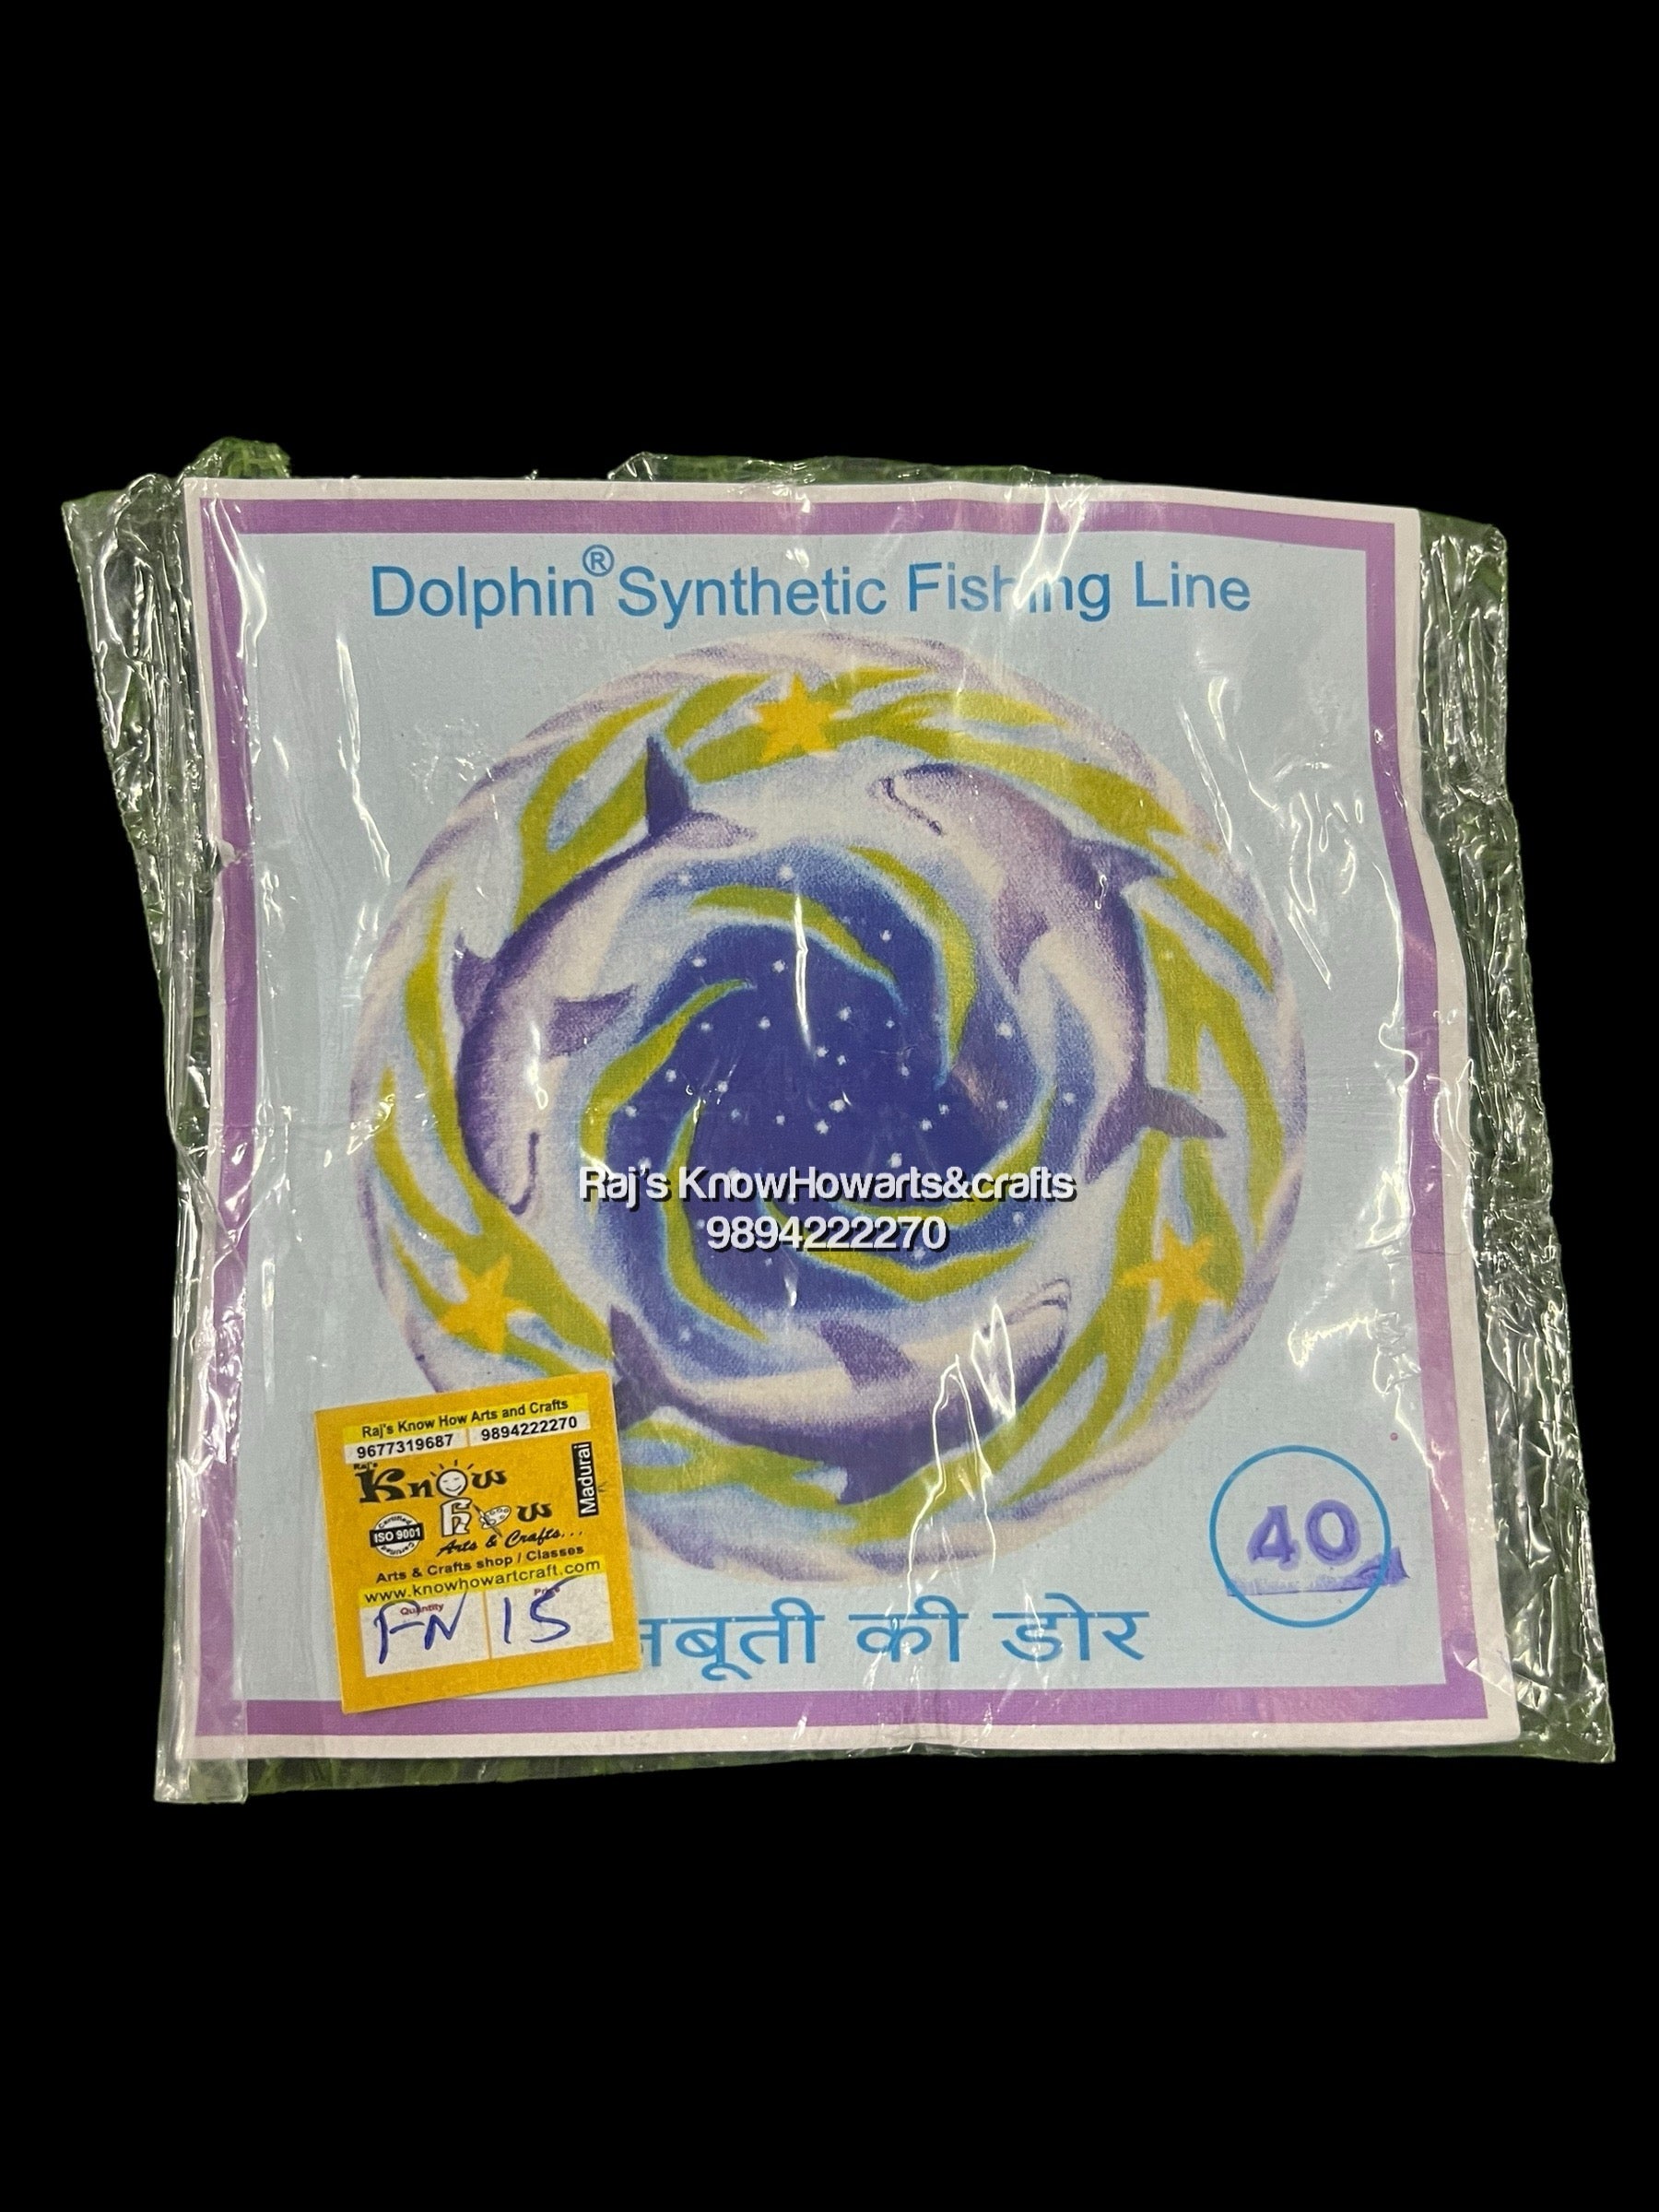 Dolphin synthetic fishing line